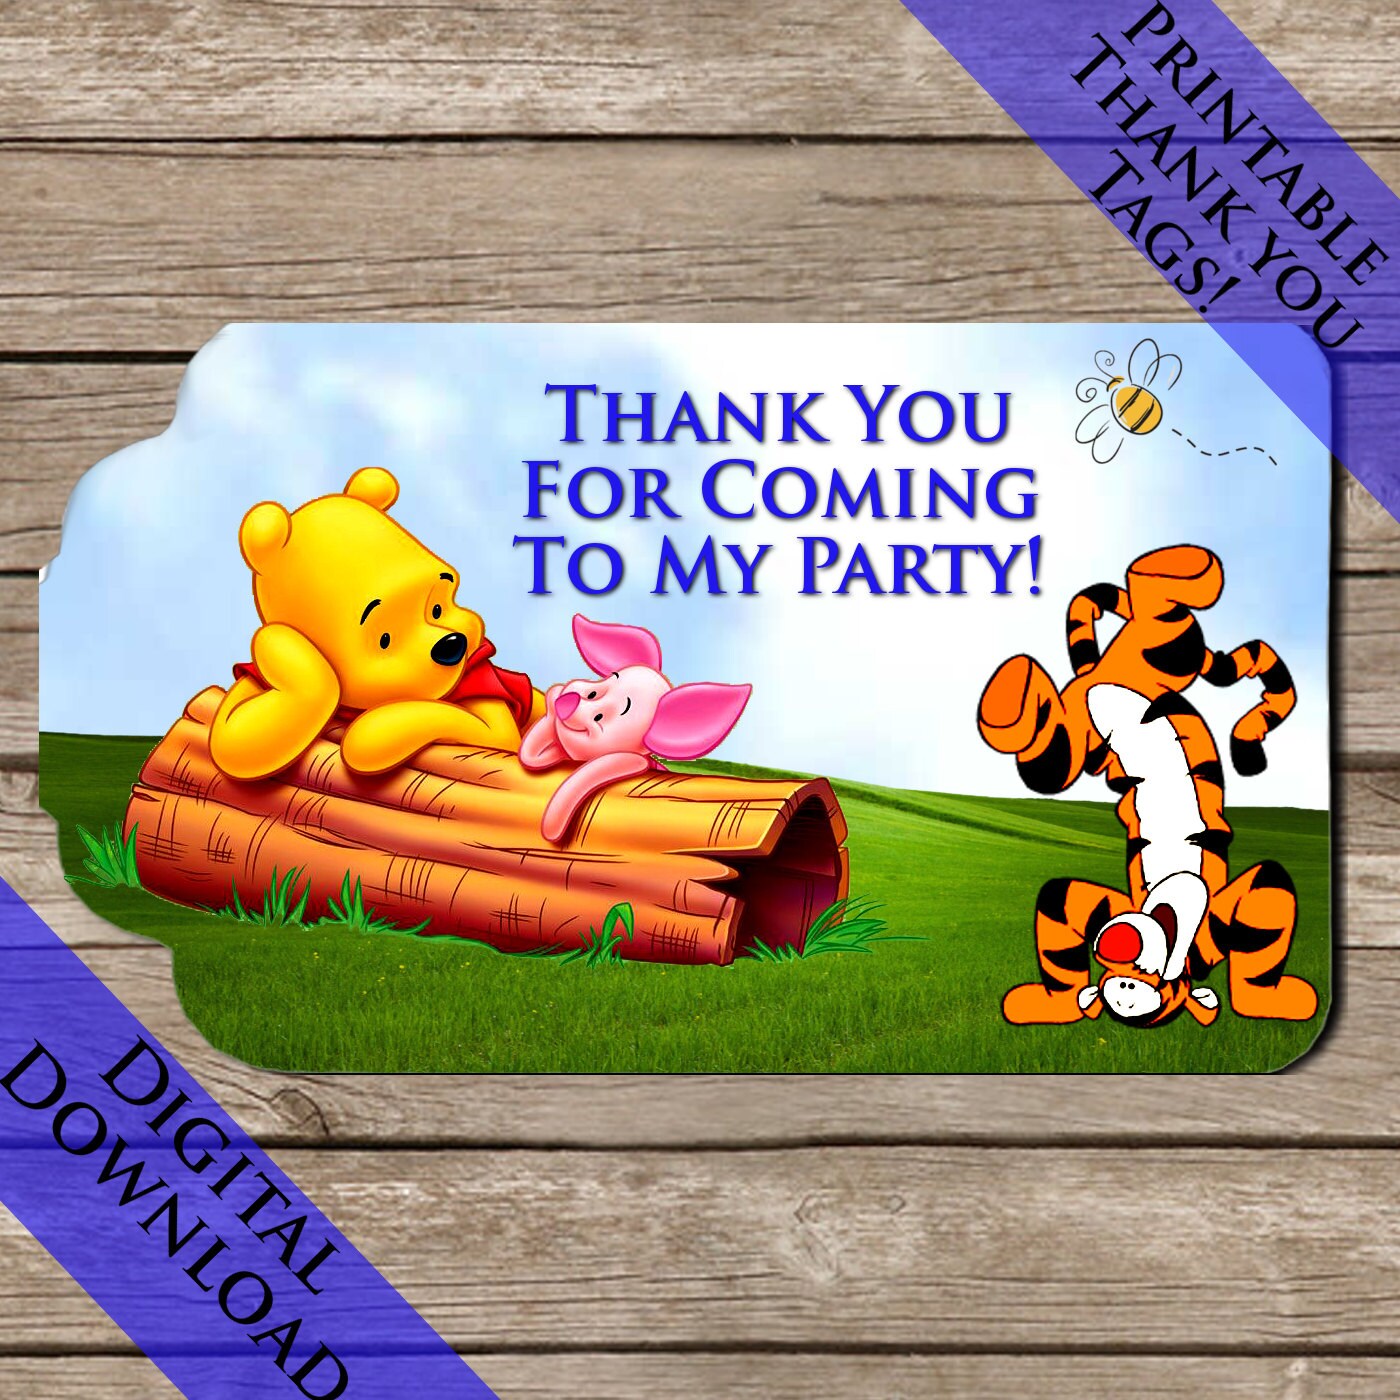 Winnie The Pooh Thank you tags Digital Download Printable